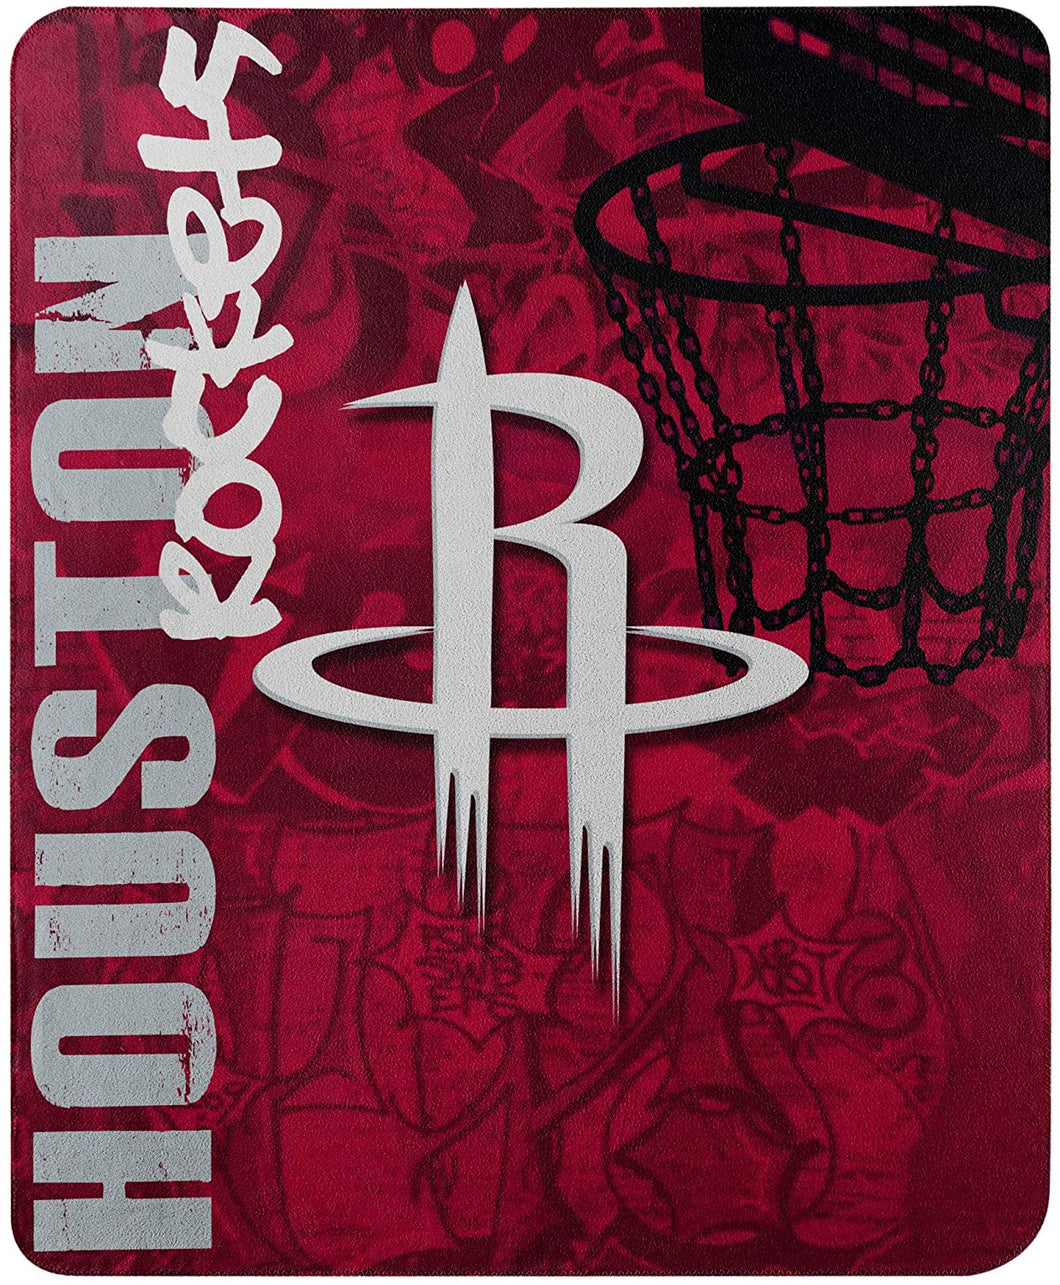 Rockets Printed Fleece Throw, 50-inch by 60-inch